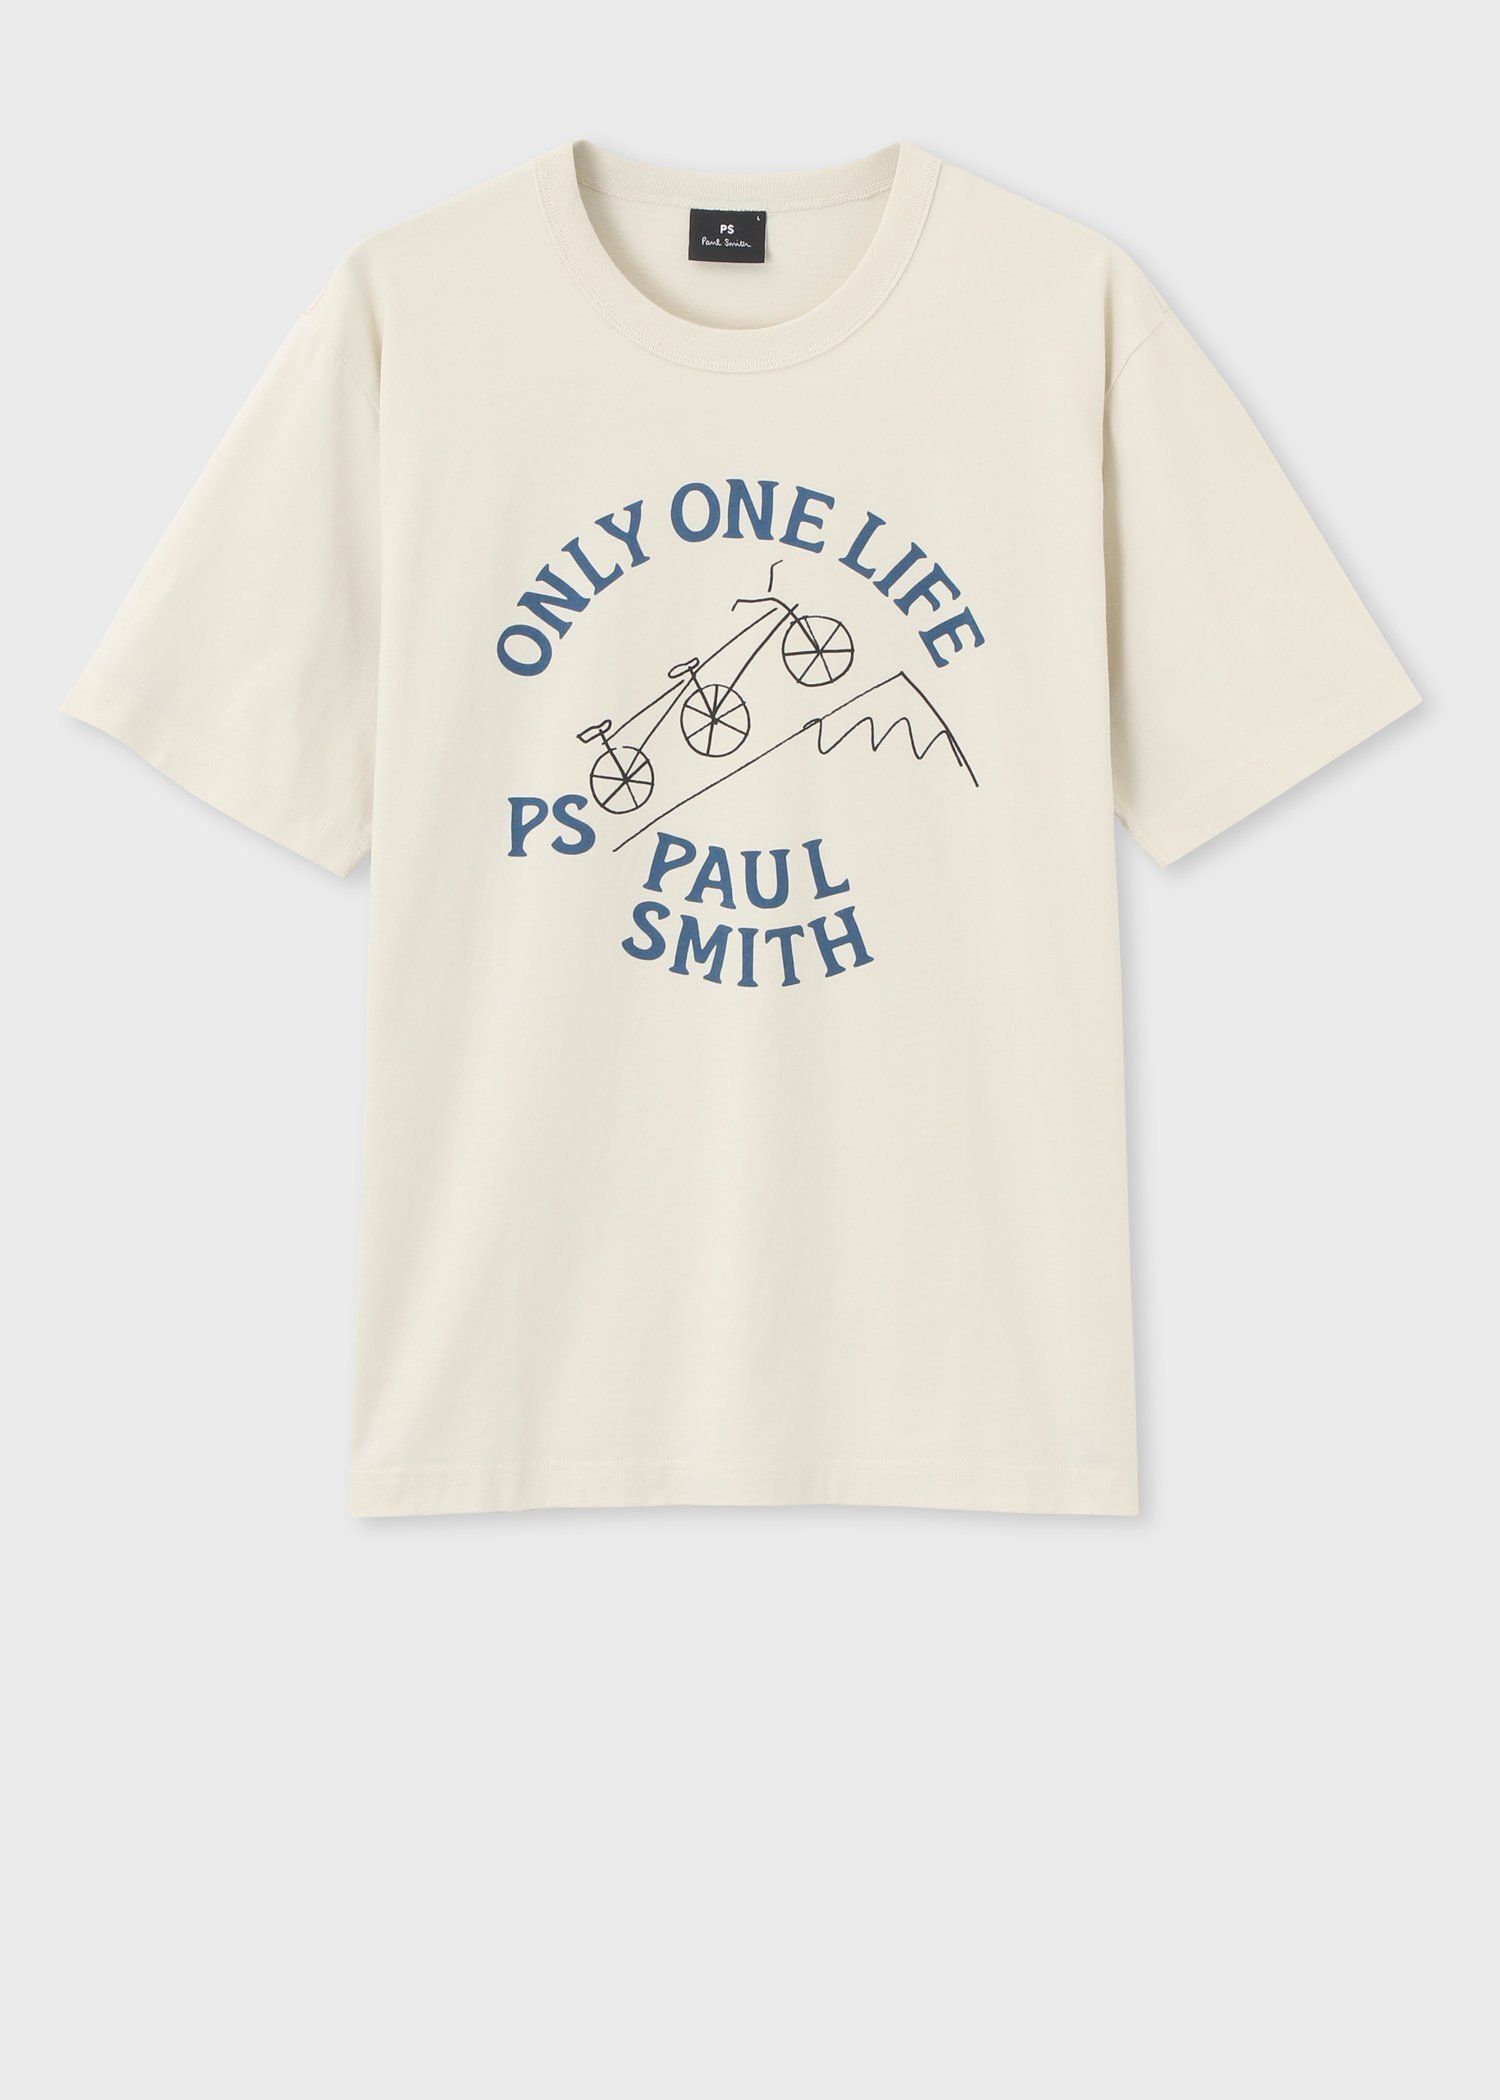 Drawn by Paul "ONLY ONE LIFE" Tシャツ